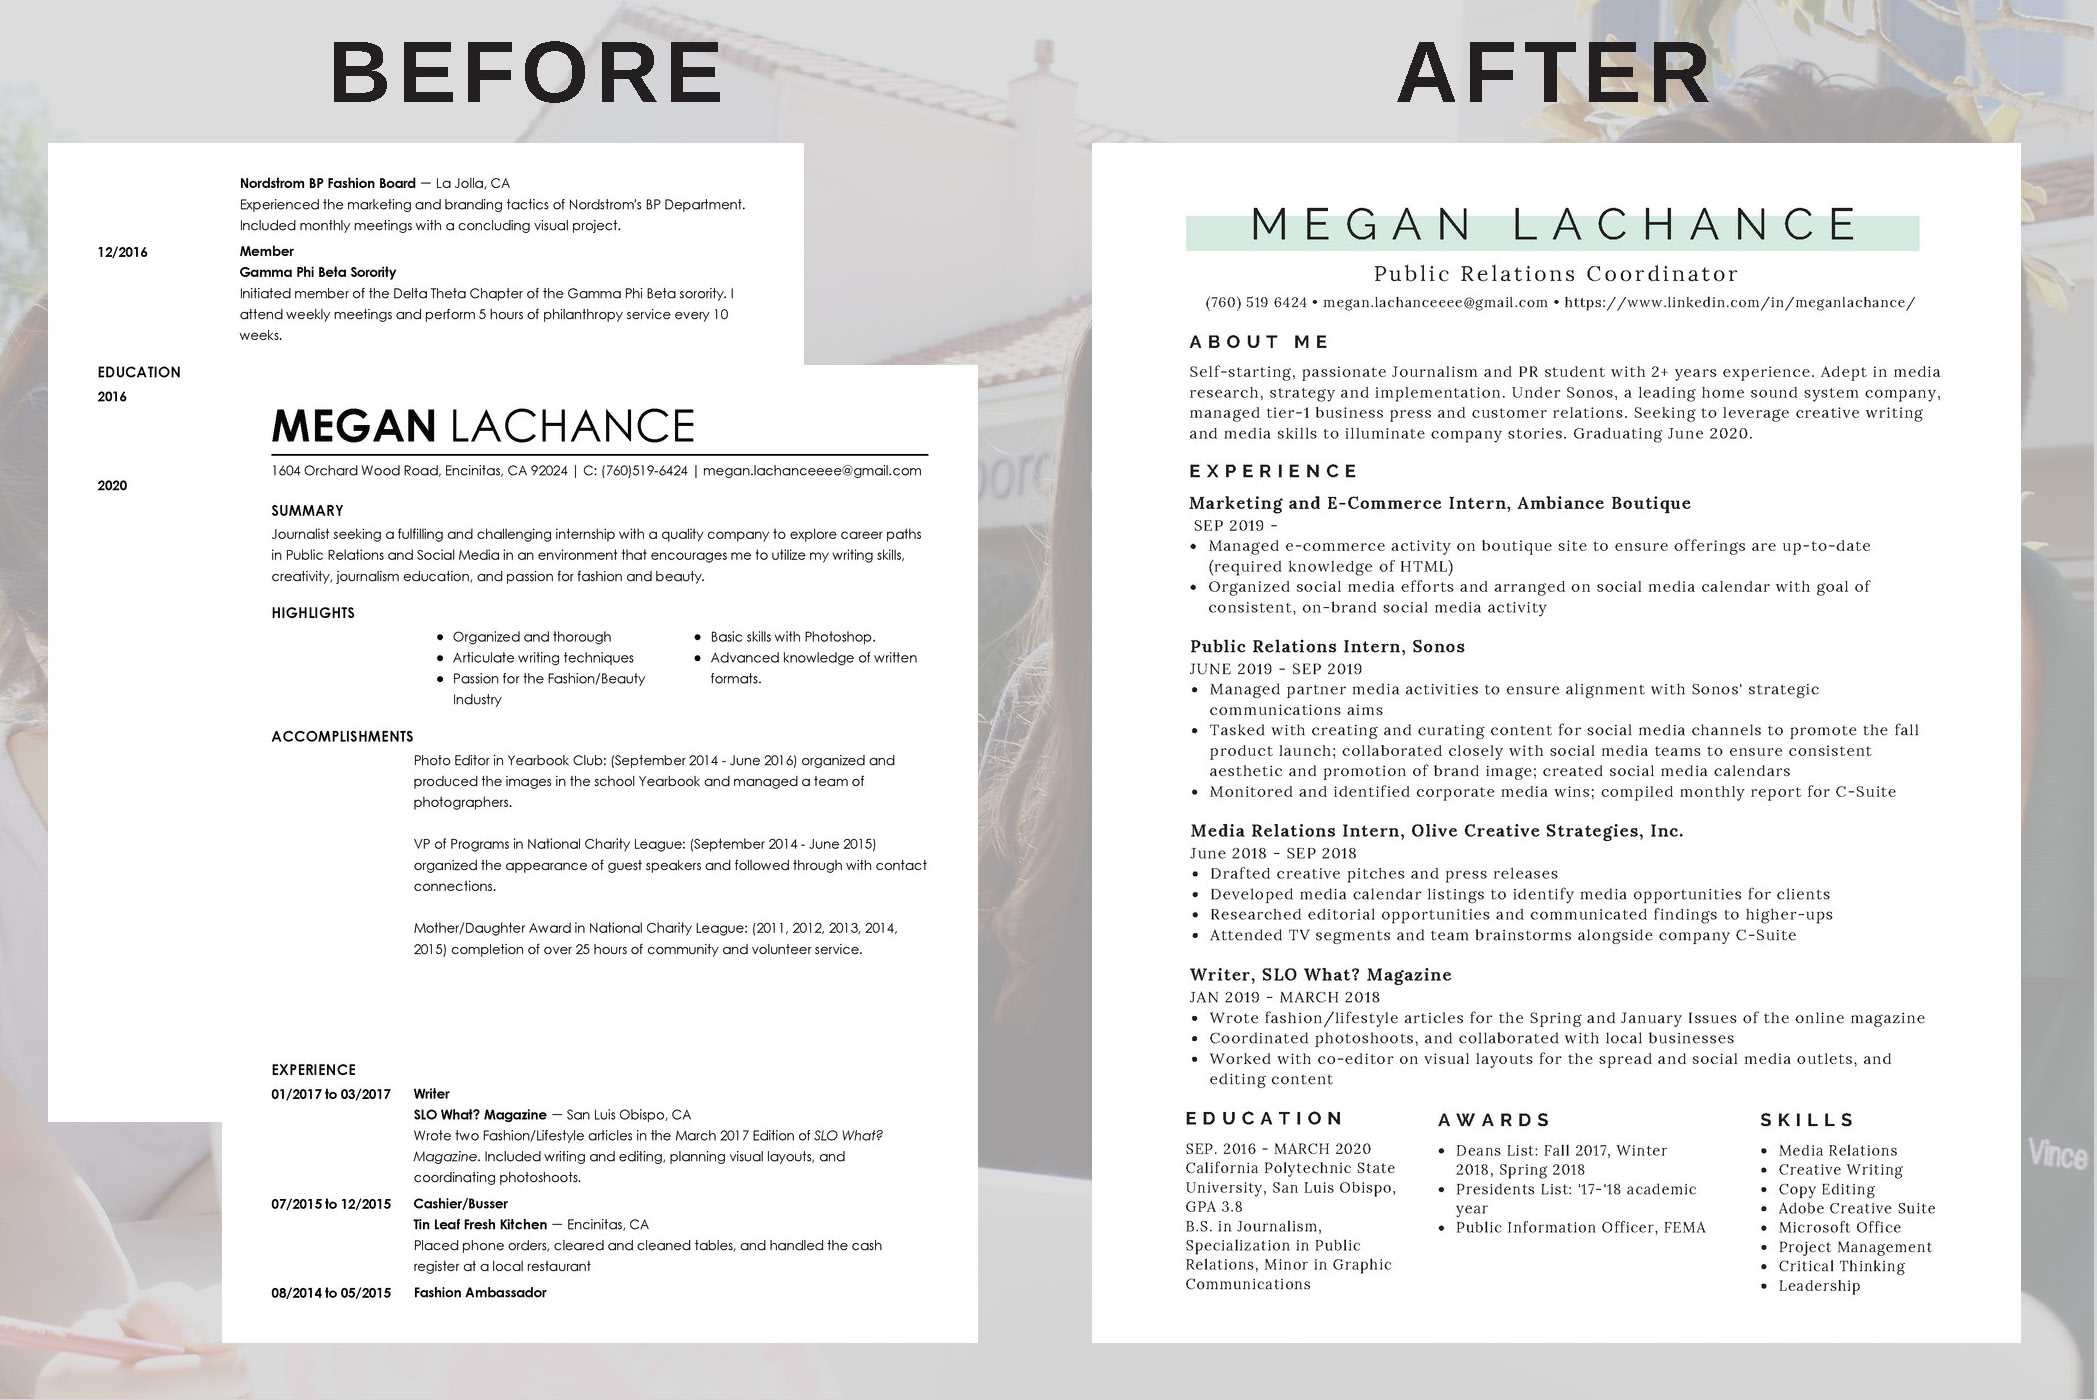 LaChance’s resumè is now refined, professional and application-ready. DeSantis’ and Lee’s simple edits to design and syntax replace the previous two-page document, bringing the resumè to post-grad caliber.